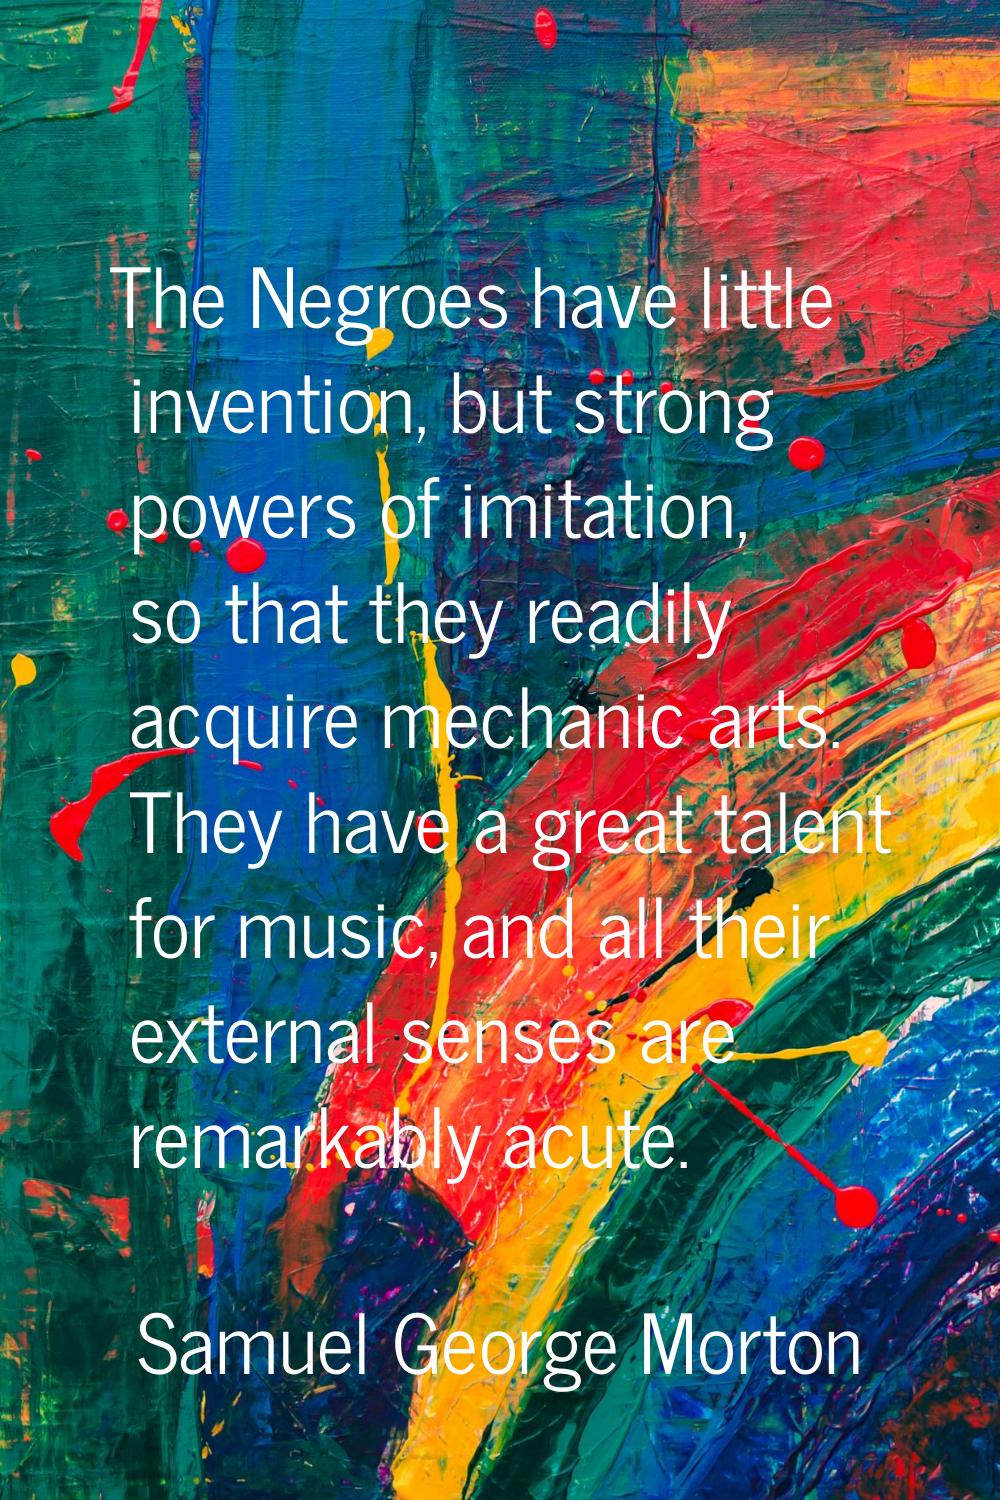 The Negroes have little invention, but strong powers of imitation, so that they readily acquire mec